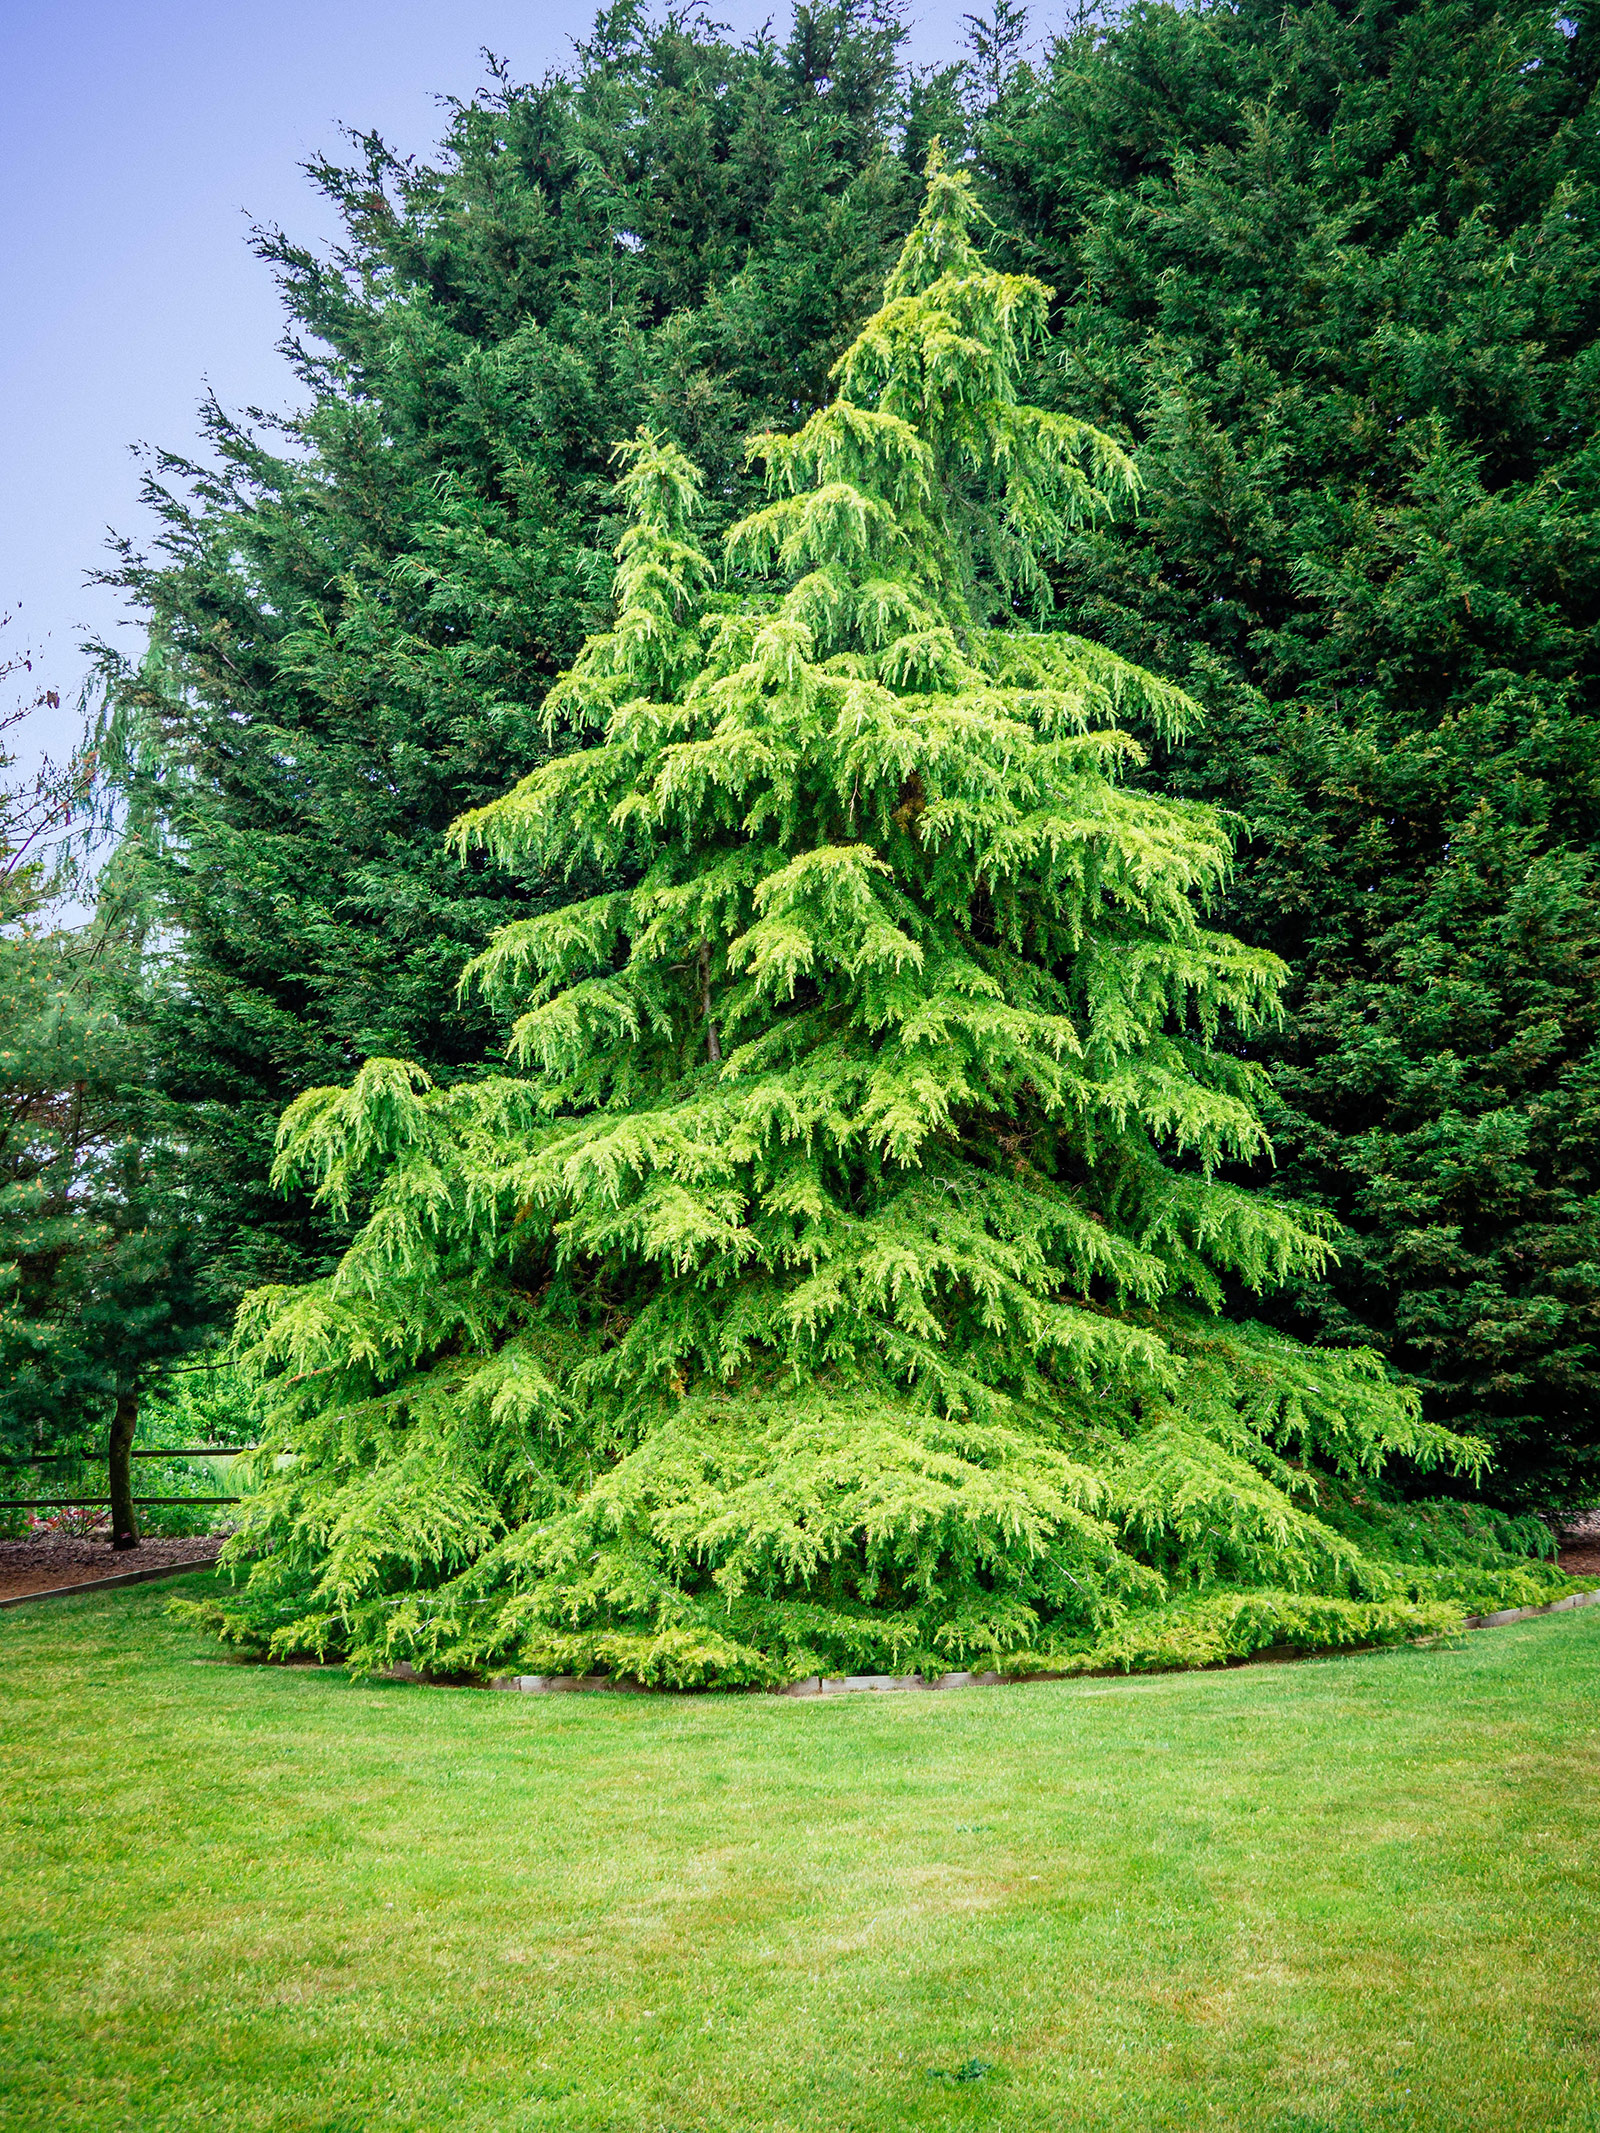 Fast-growing Deodar cedar tree on a grassy property with larger trees in the background